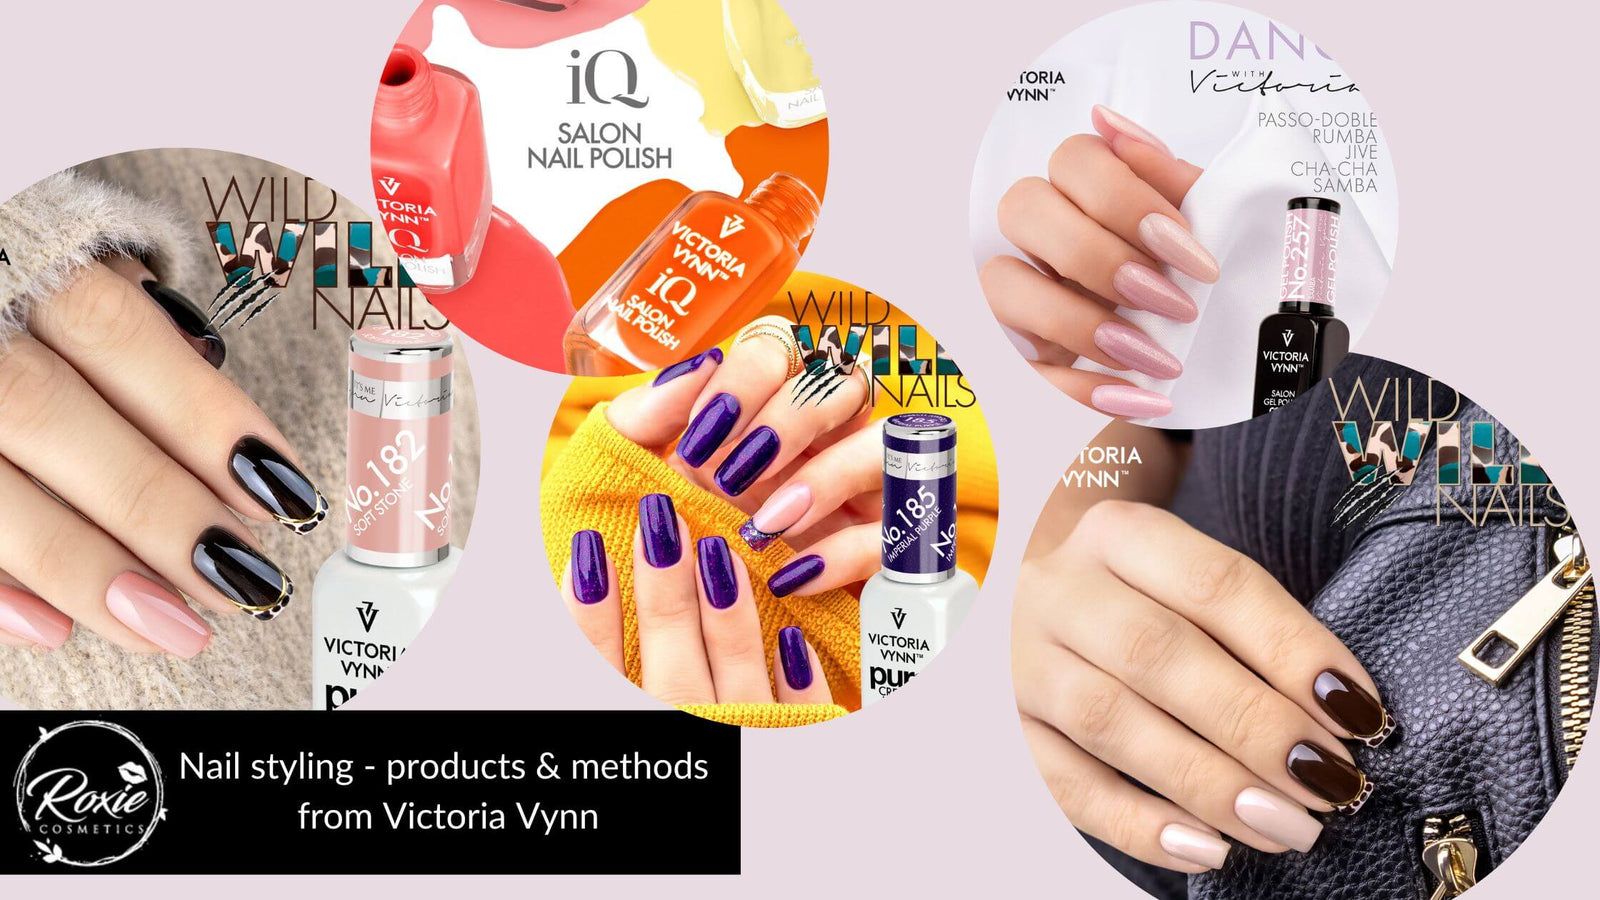 Nail styling - products and methods from Victoria Vynn